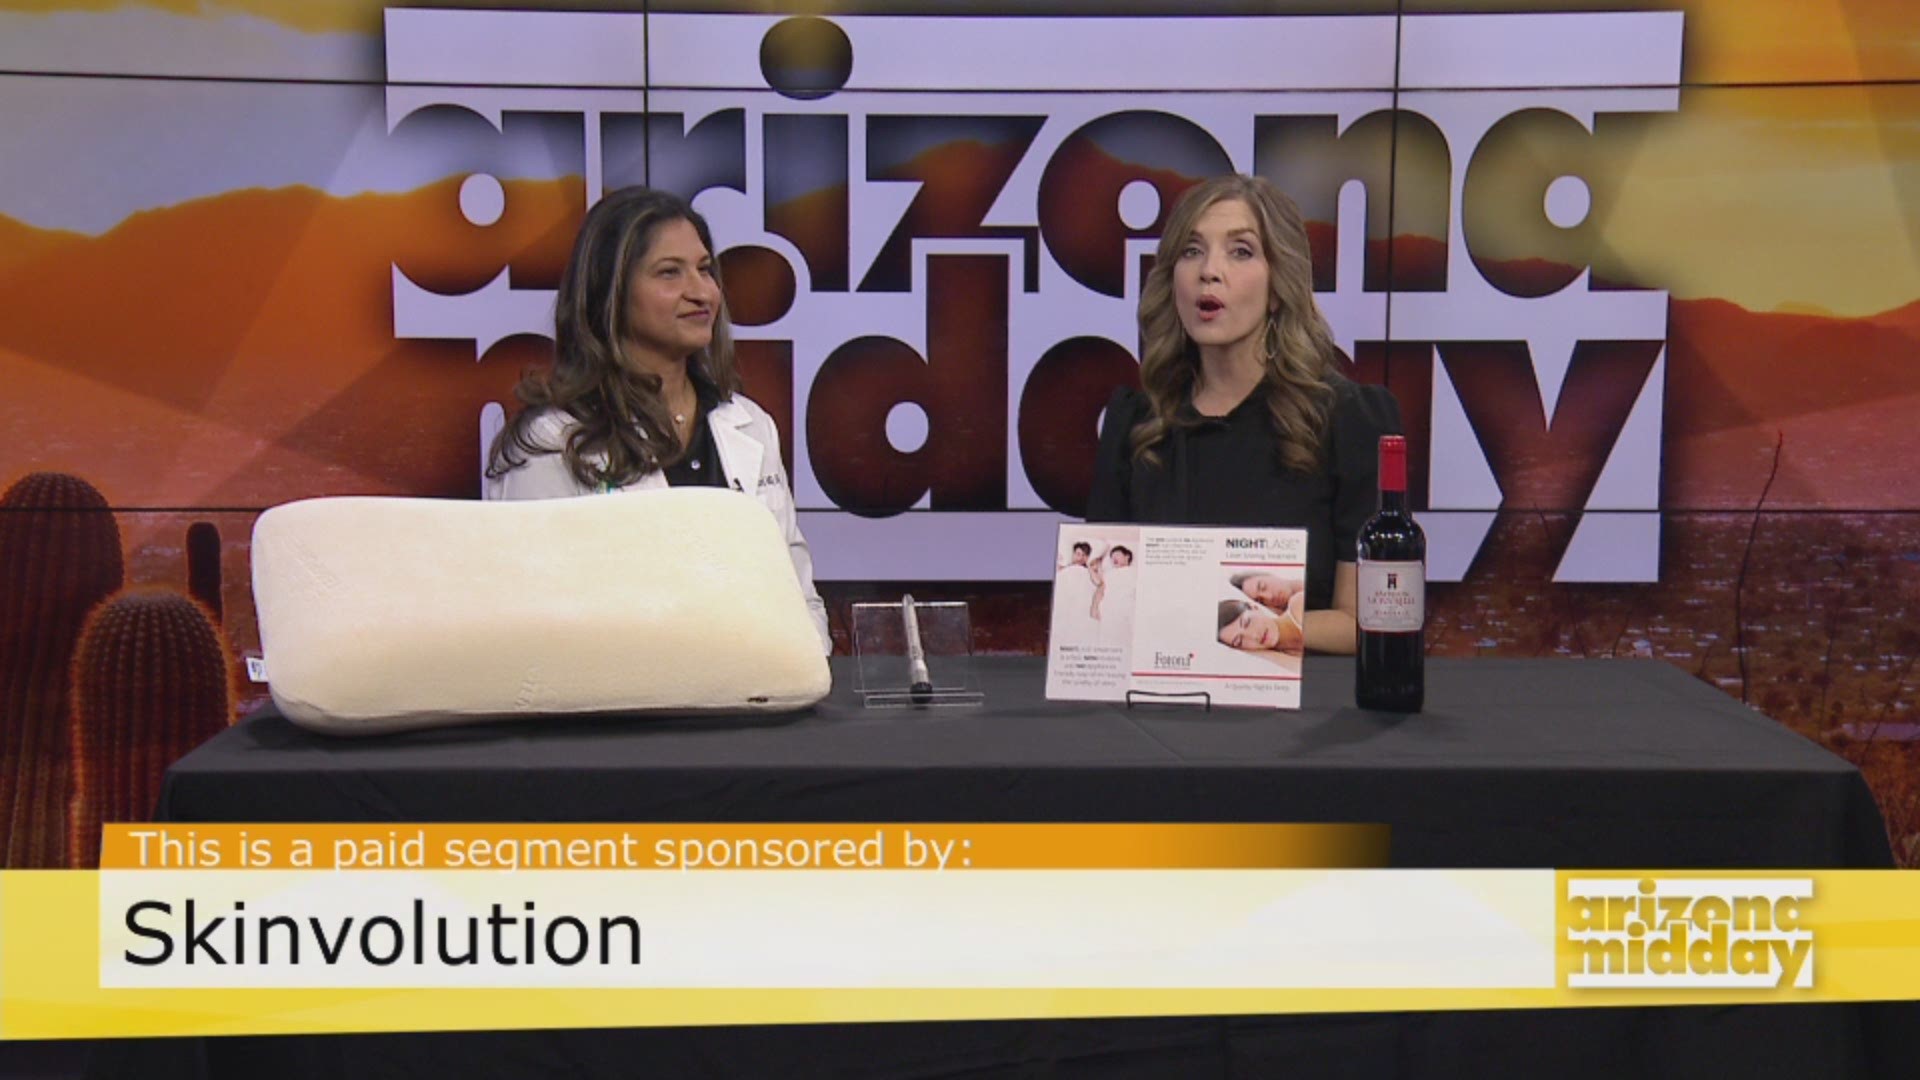 Dr. Trupti Patel from Skinvolution gives us the scoop on what causes snoring and how the new treatment NightLase can help get rid of it.